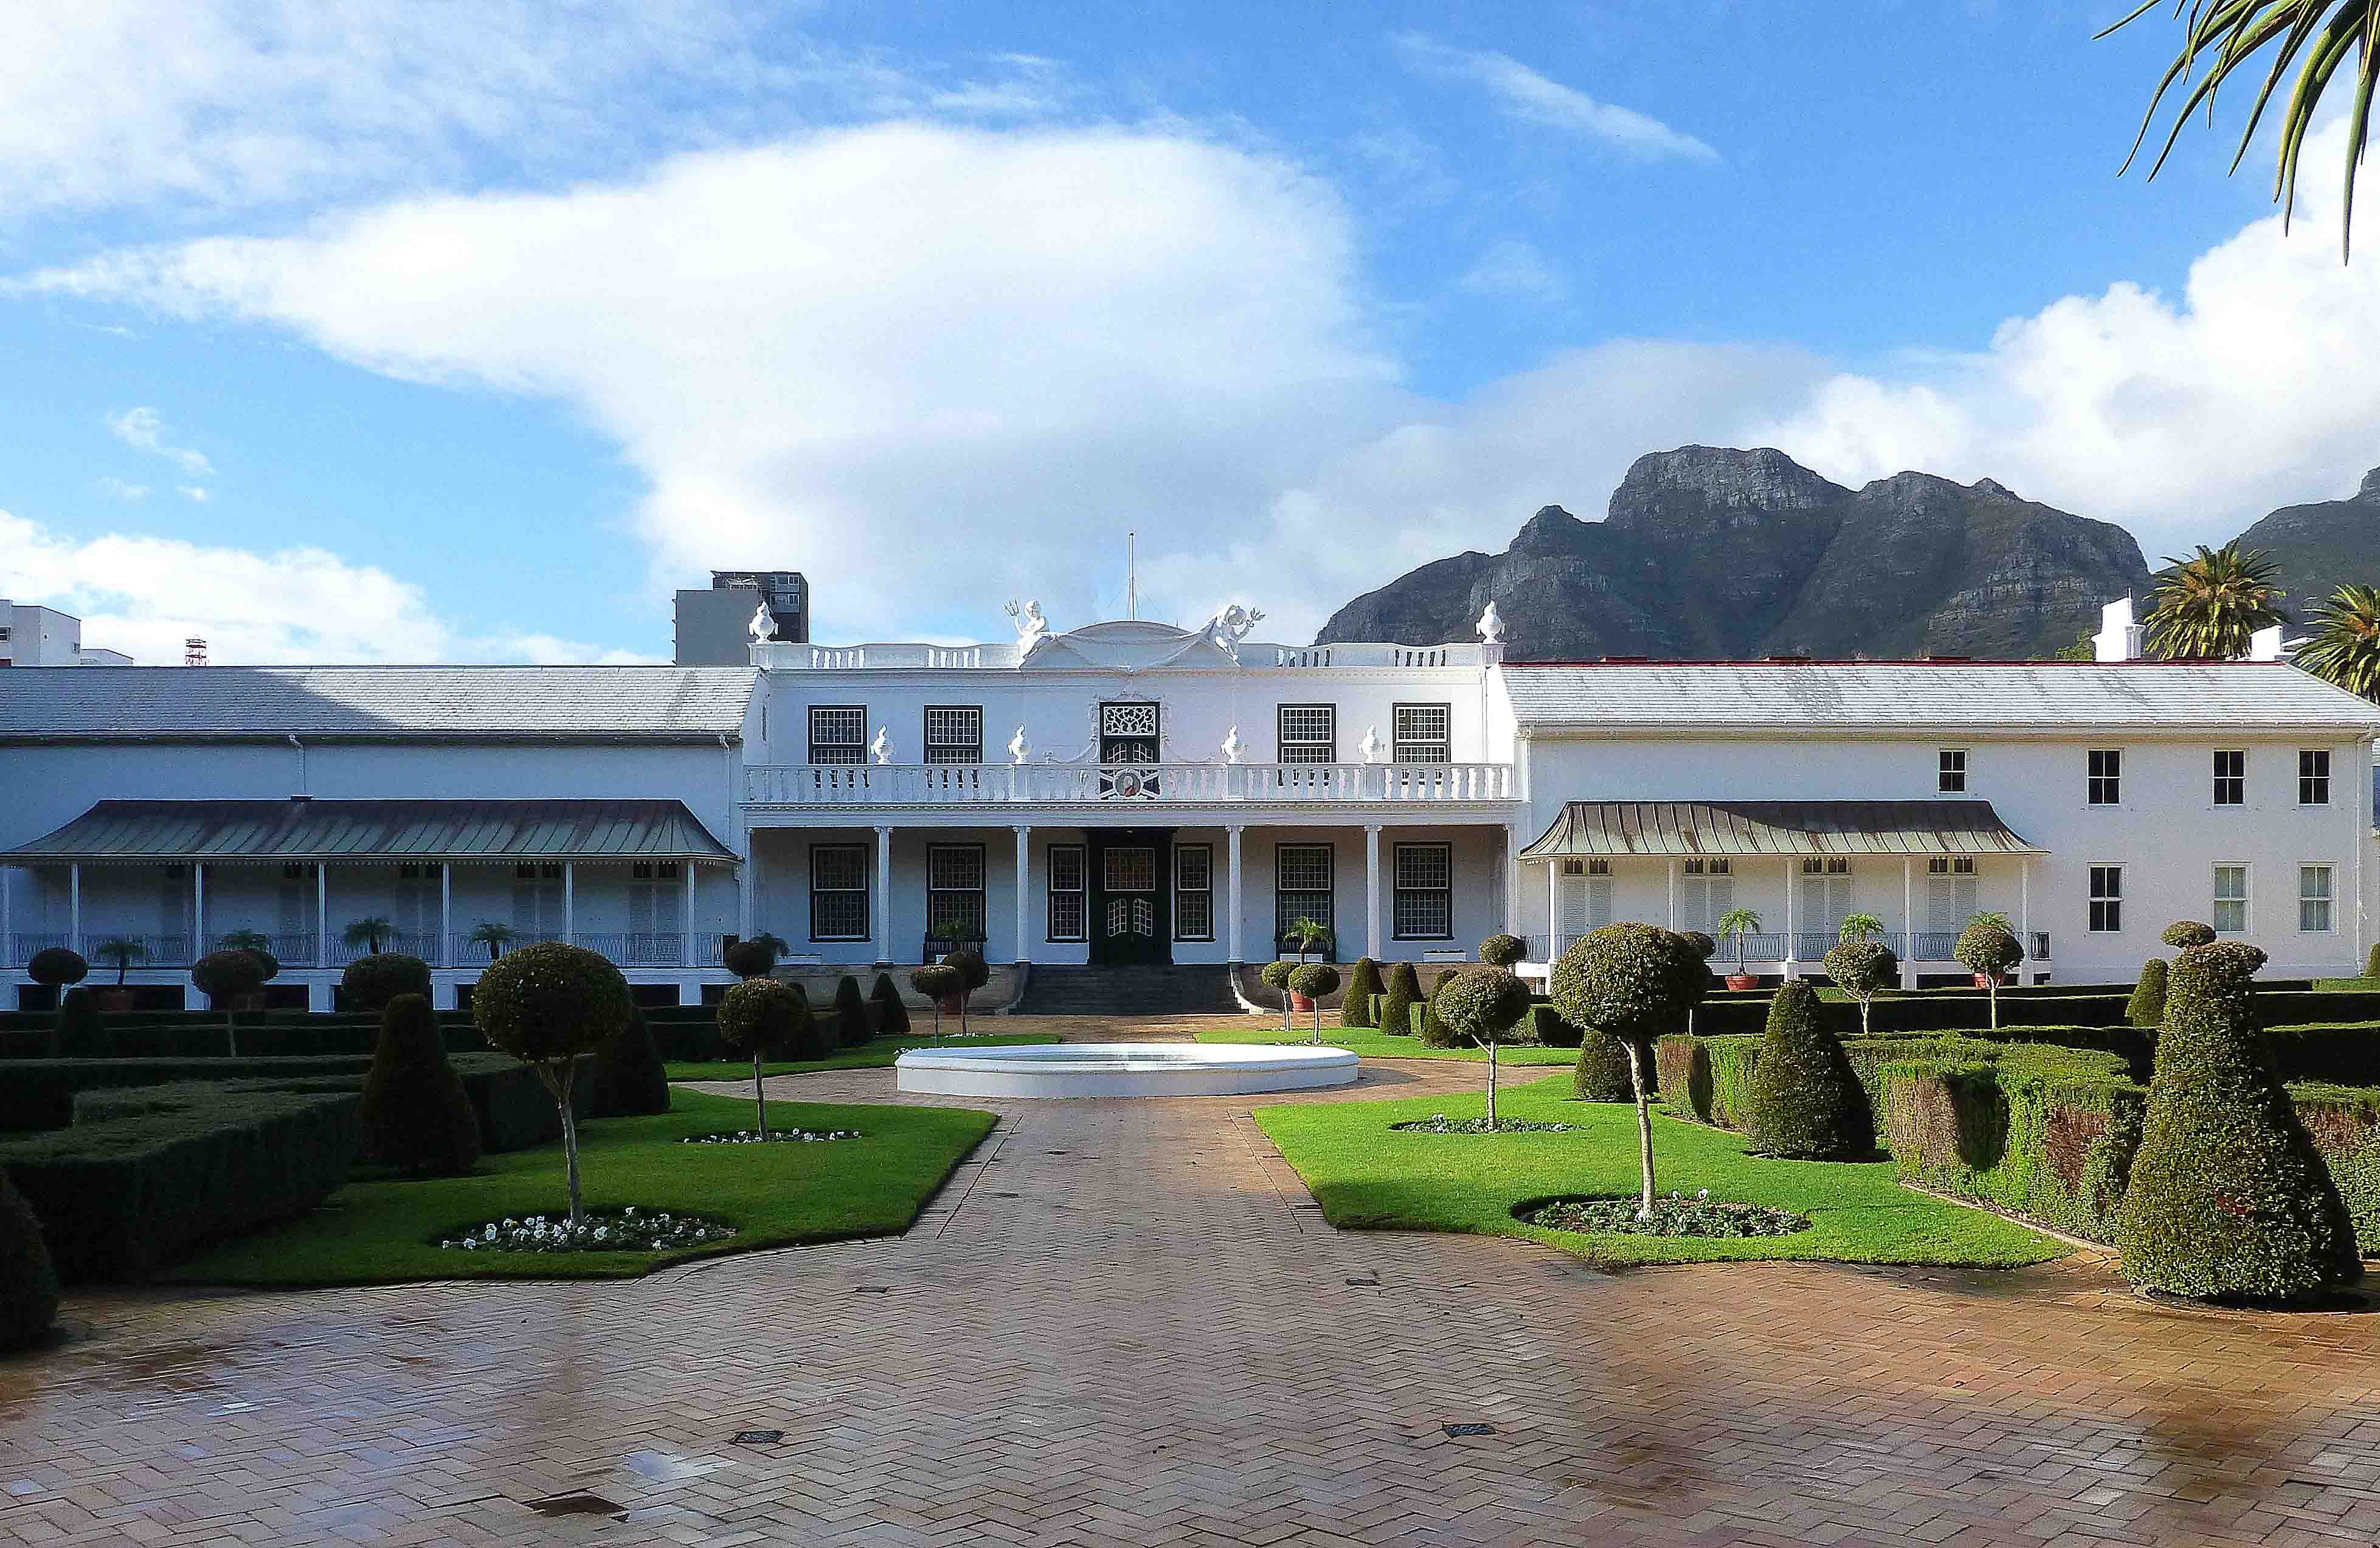 De Tuynhuys Was the Official Residence of Most Governors of the Cape - Dutch, Batavian & British